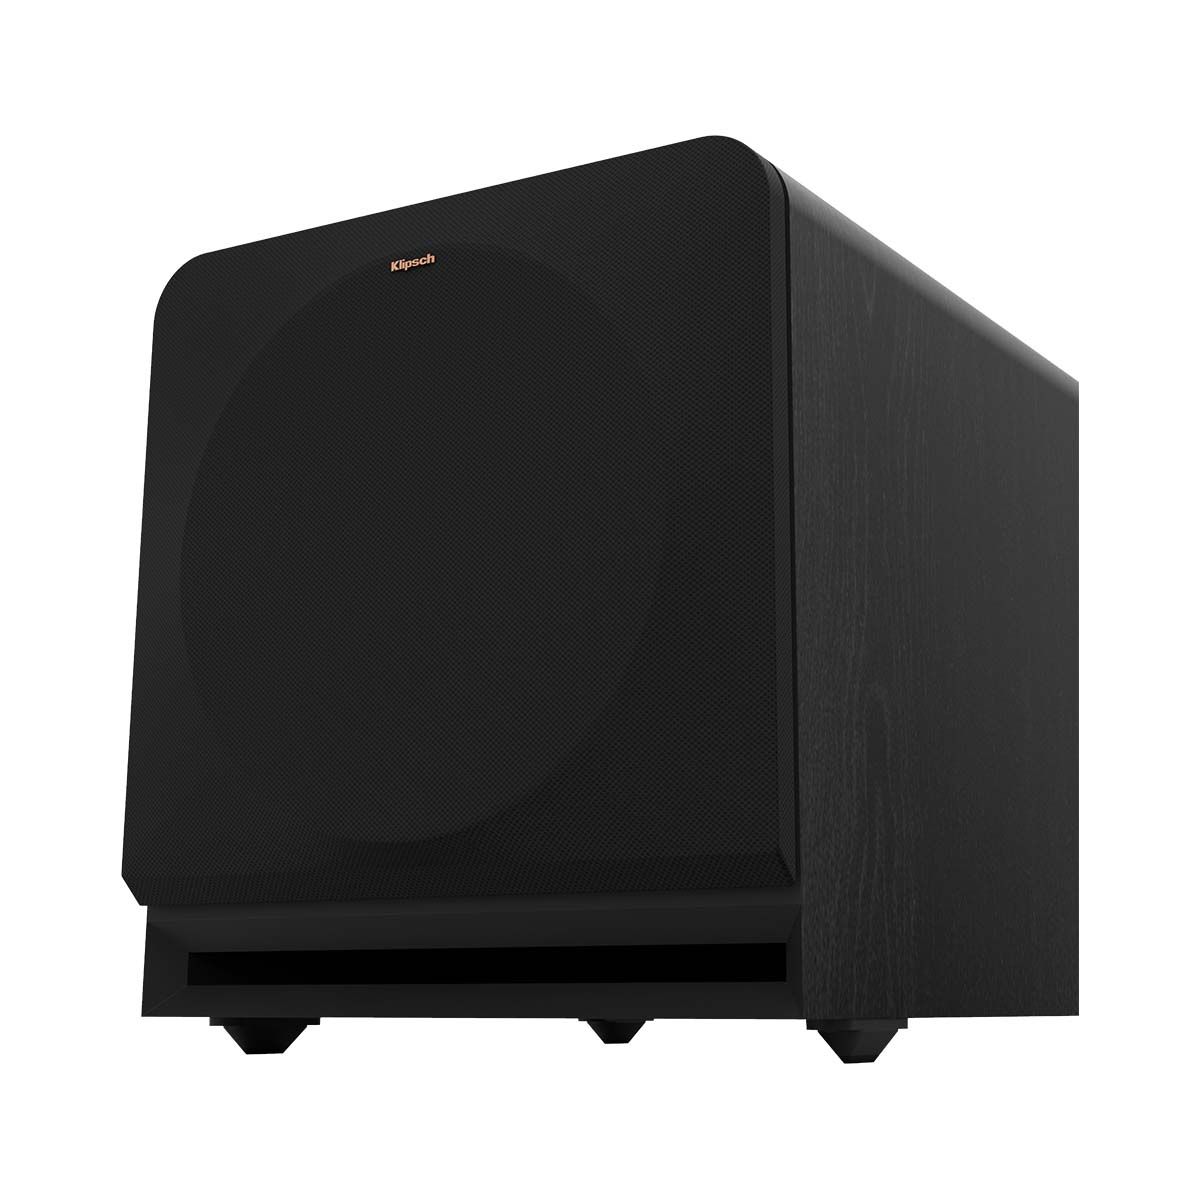 Klipsch RP-1200SW 12" Powered Subwoofer - Ebony - angled right front view with grille